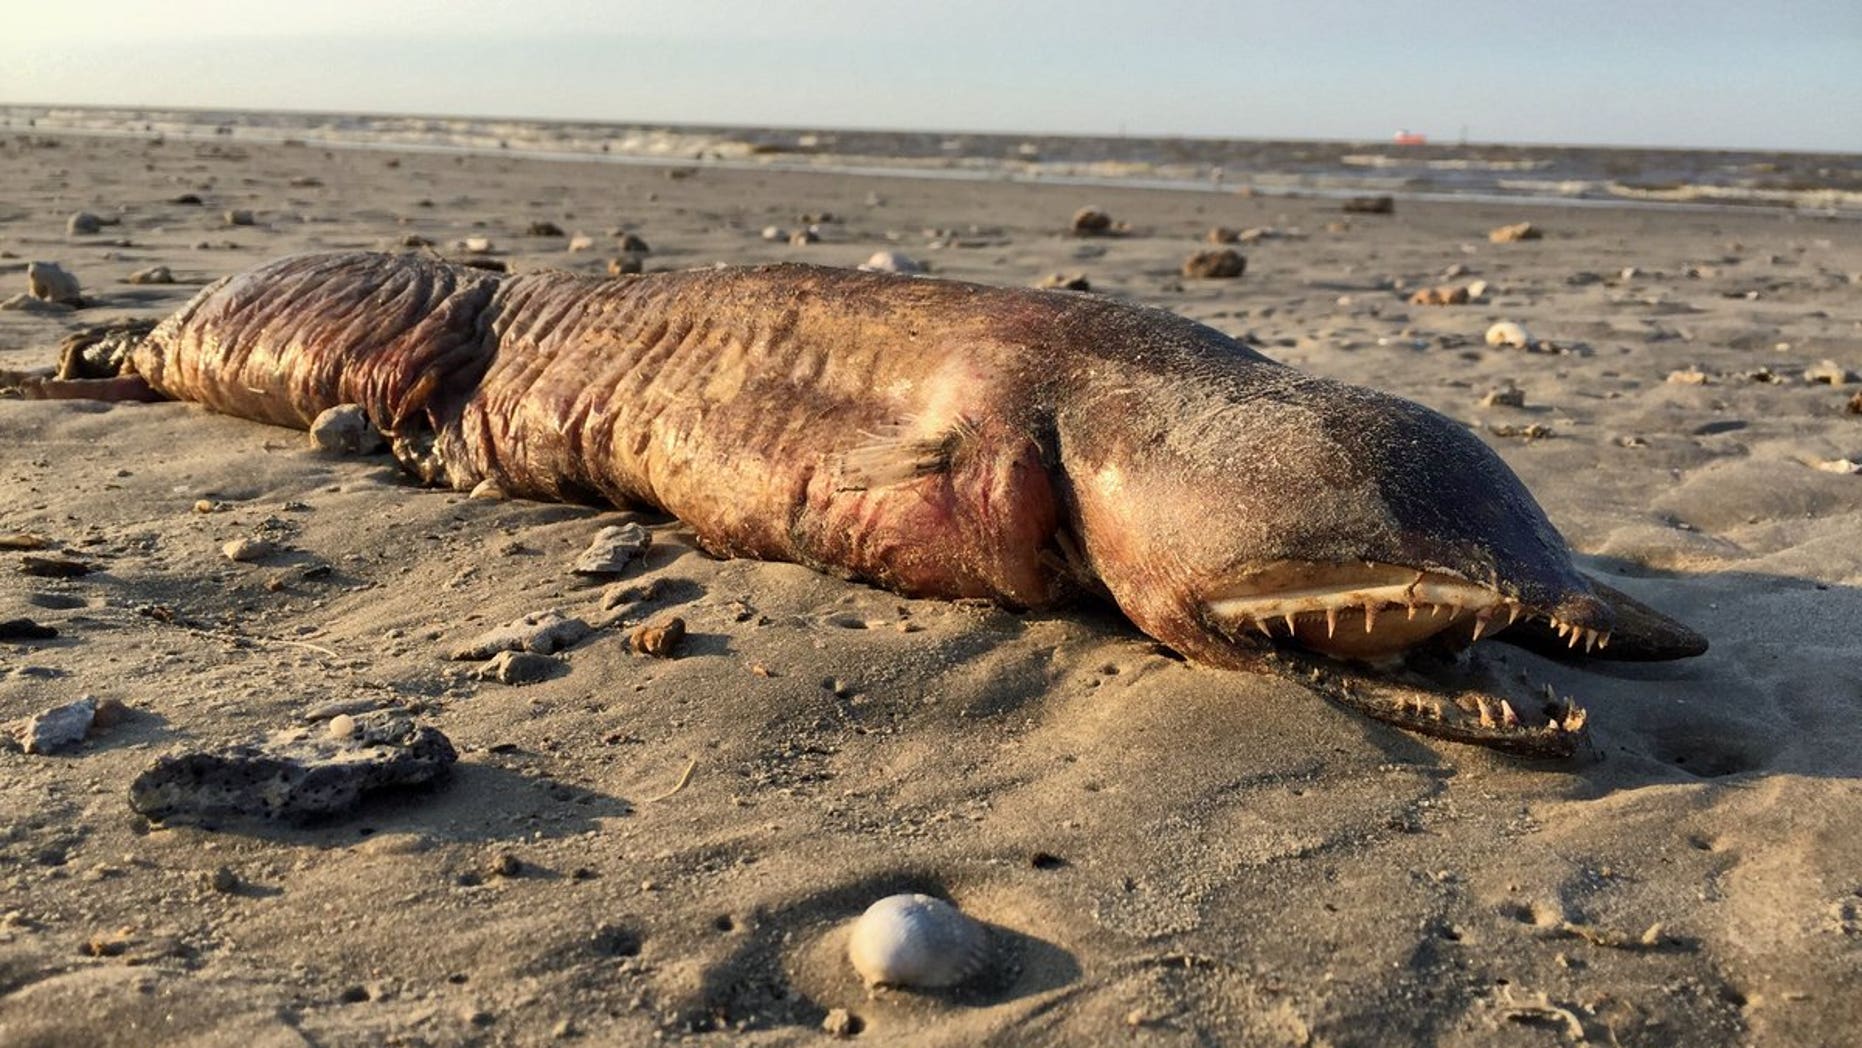 Image result for Gruesome, fanged 'demon fish' washes up on Texas beach, sparking mystery